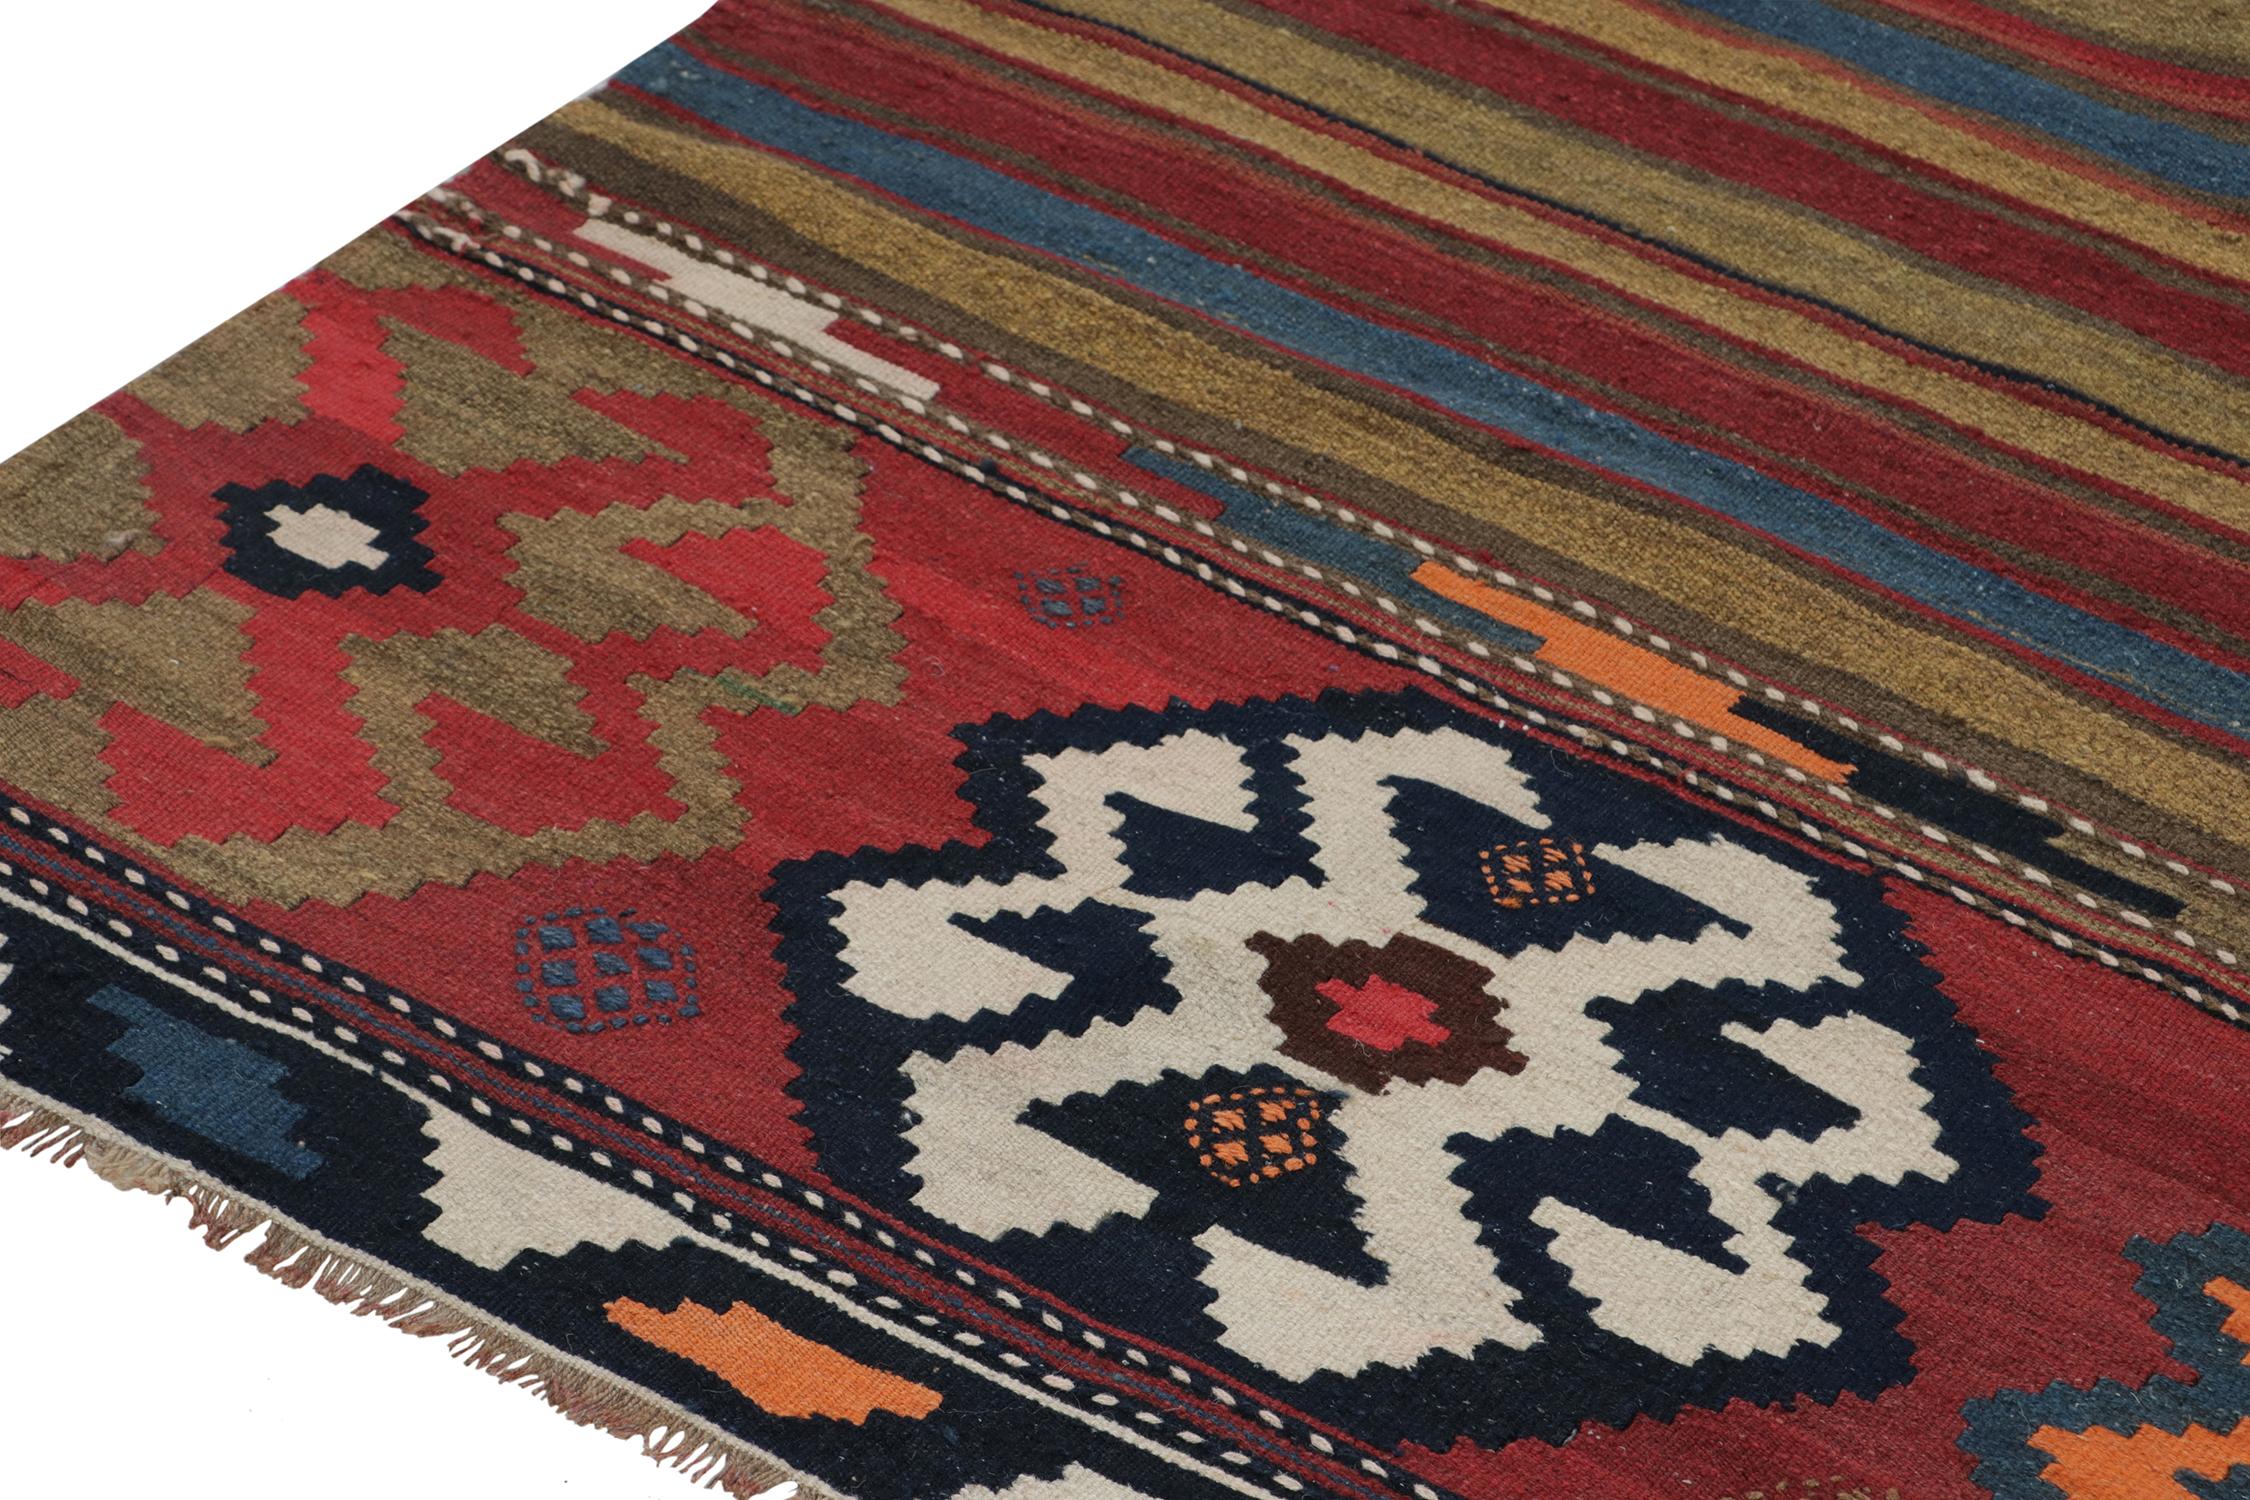 Vintage Persian Kilim Rug in Polychromatic Geometric Patterns by Rug & Kilim In Good Condition For Sale In Long Island City, NY